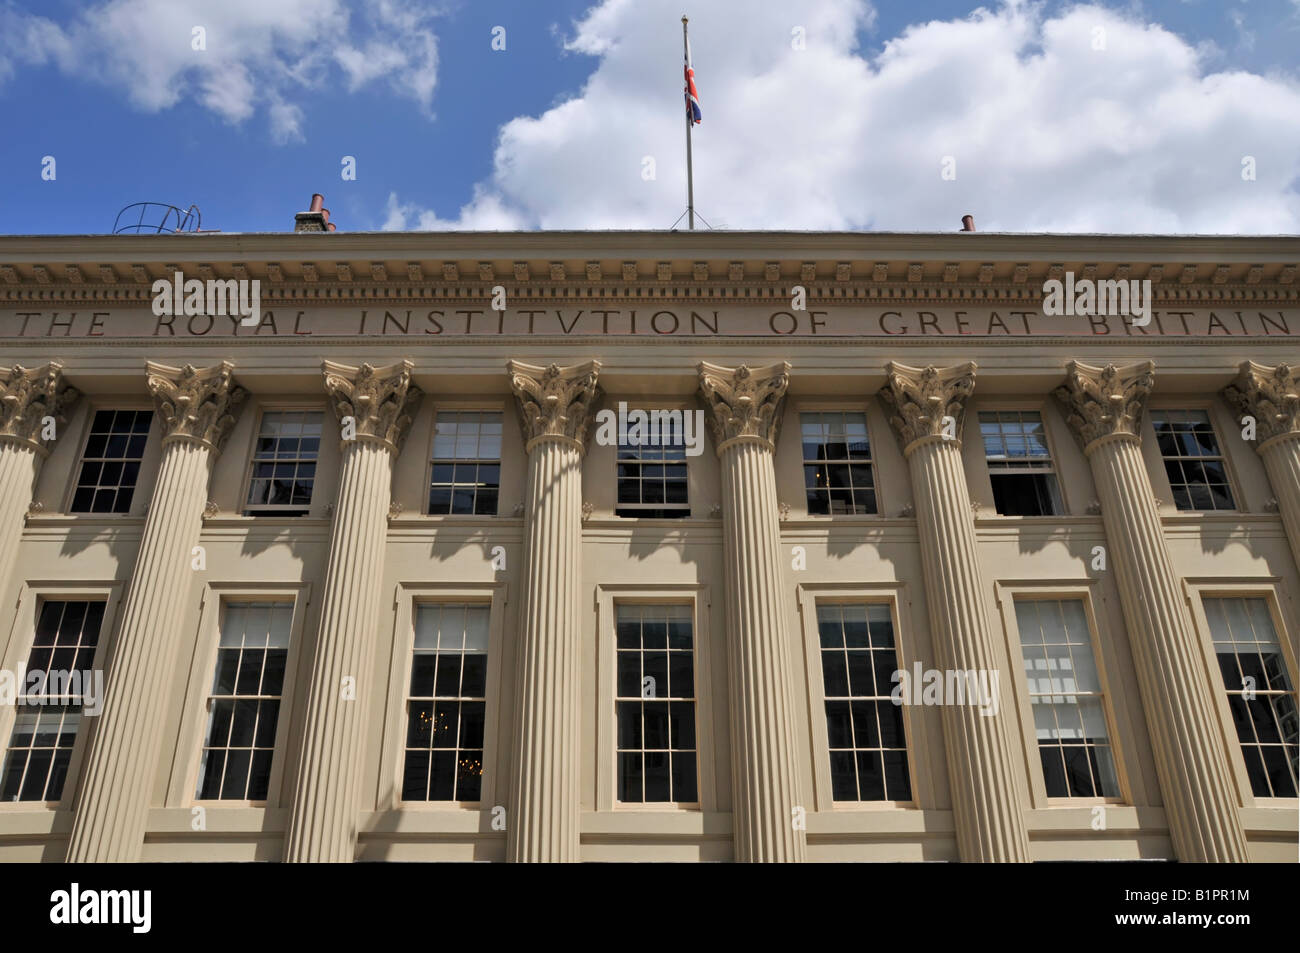 Royal Institution of Great Britain & Faraday Museum building facade at  roof level a colonnade Corinthian capitals Albemarle Street London England UK Stock Photo